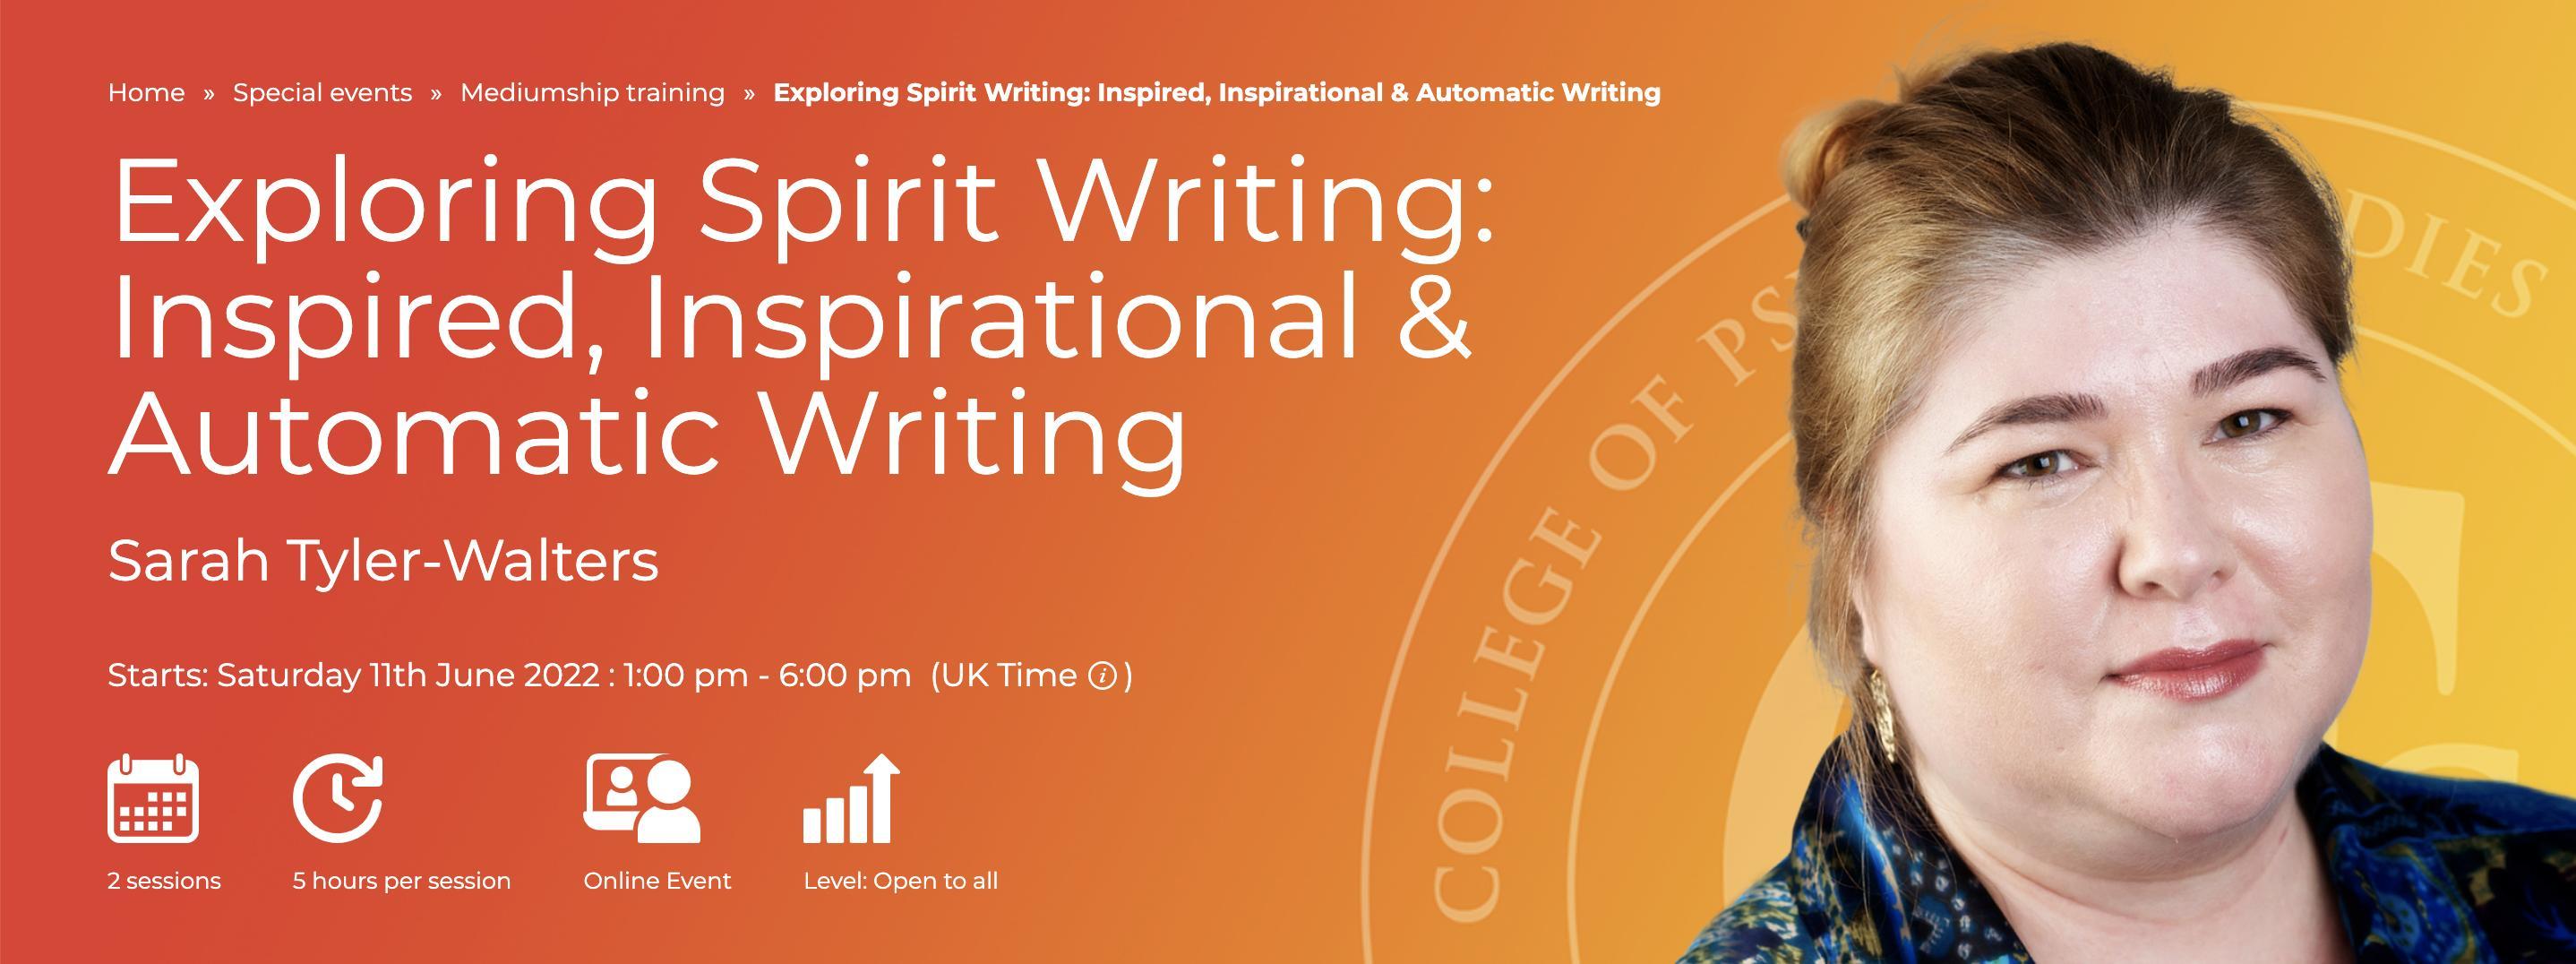 Inspired, Inspirational & Automatic Writing event banner